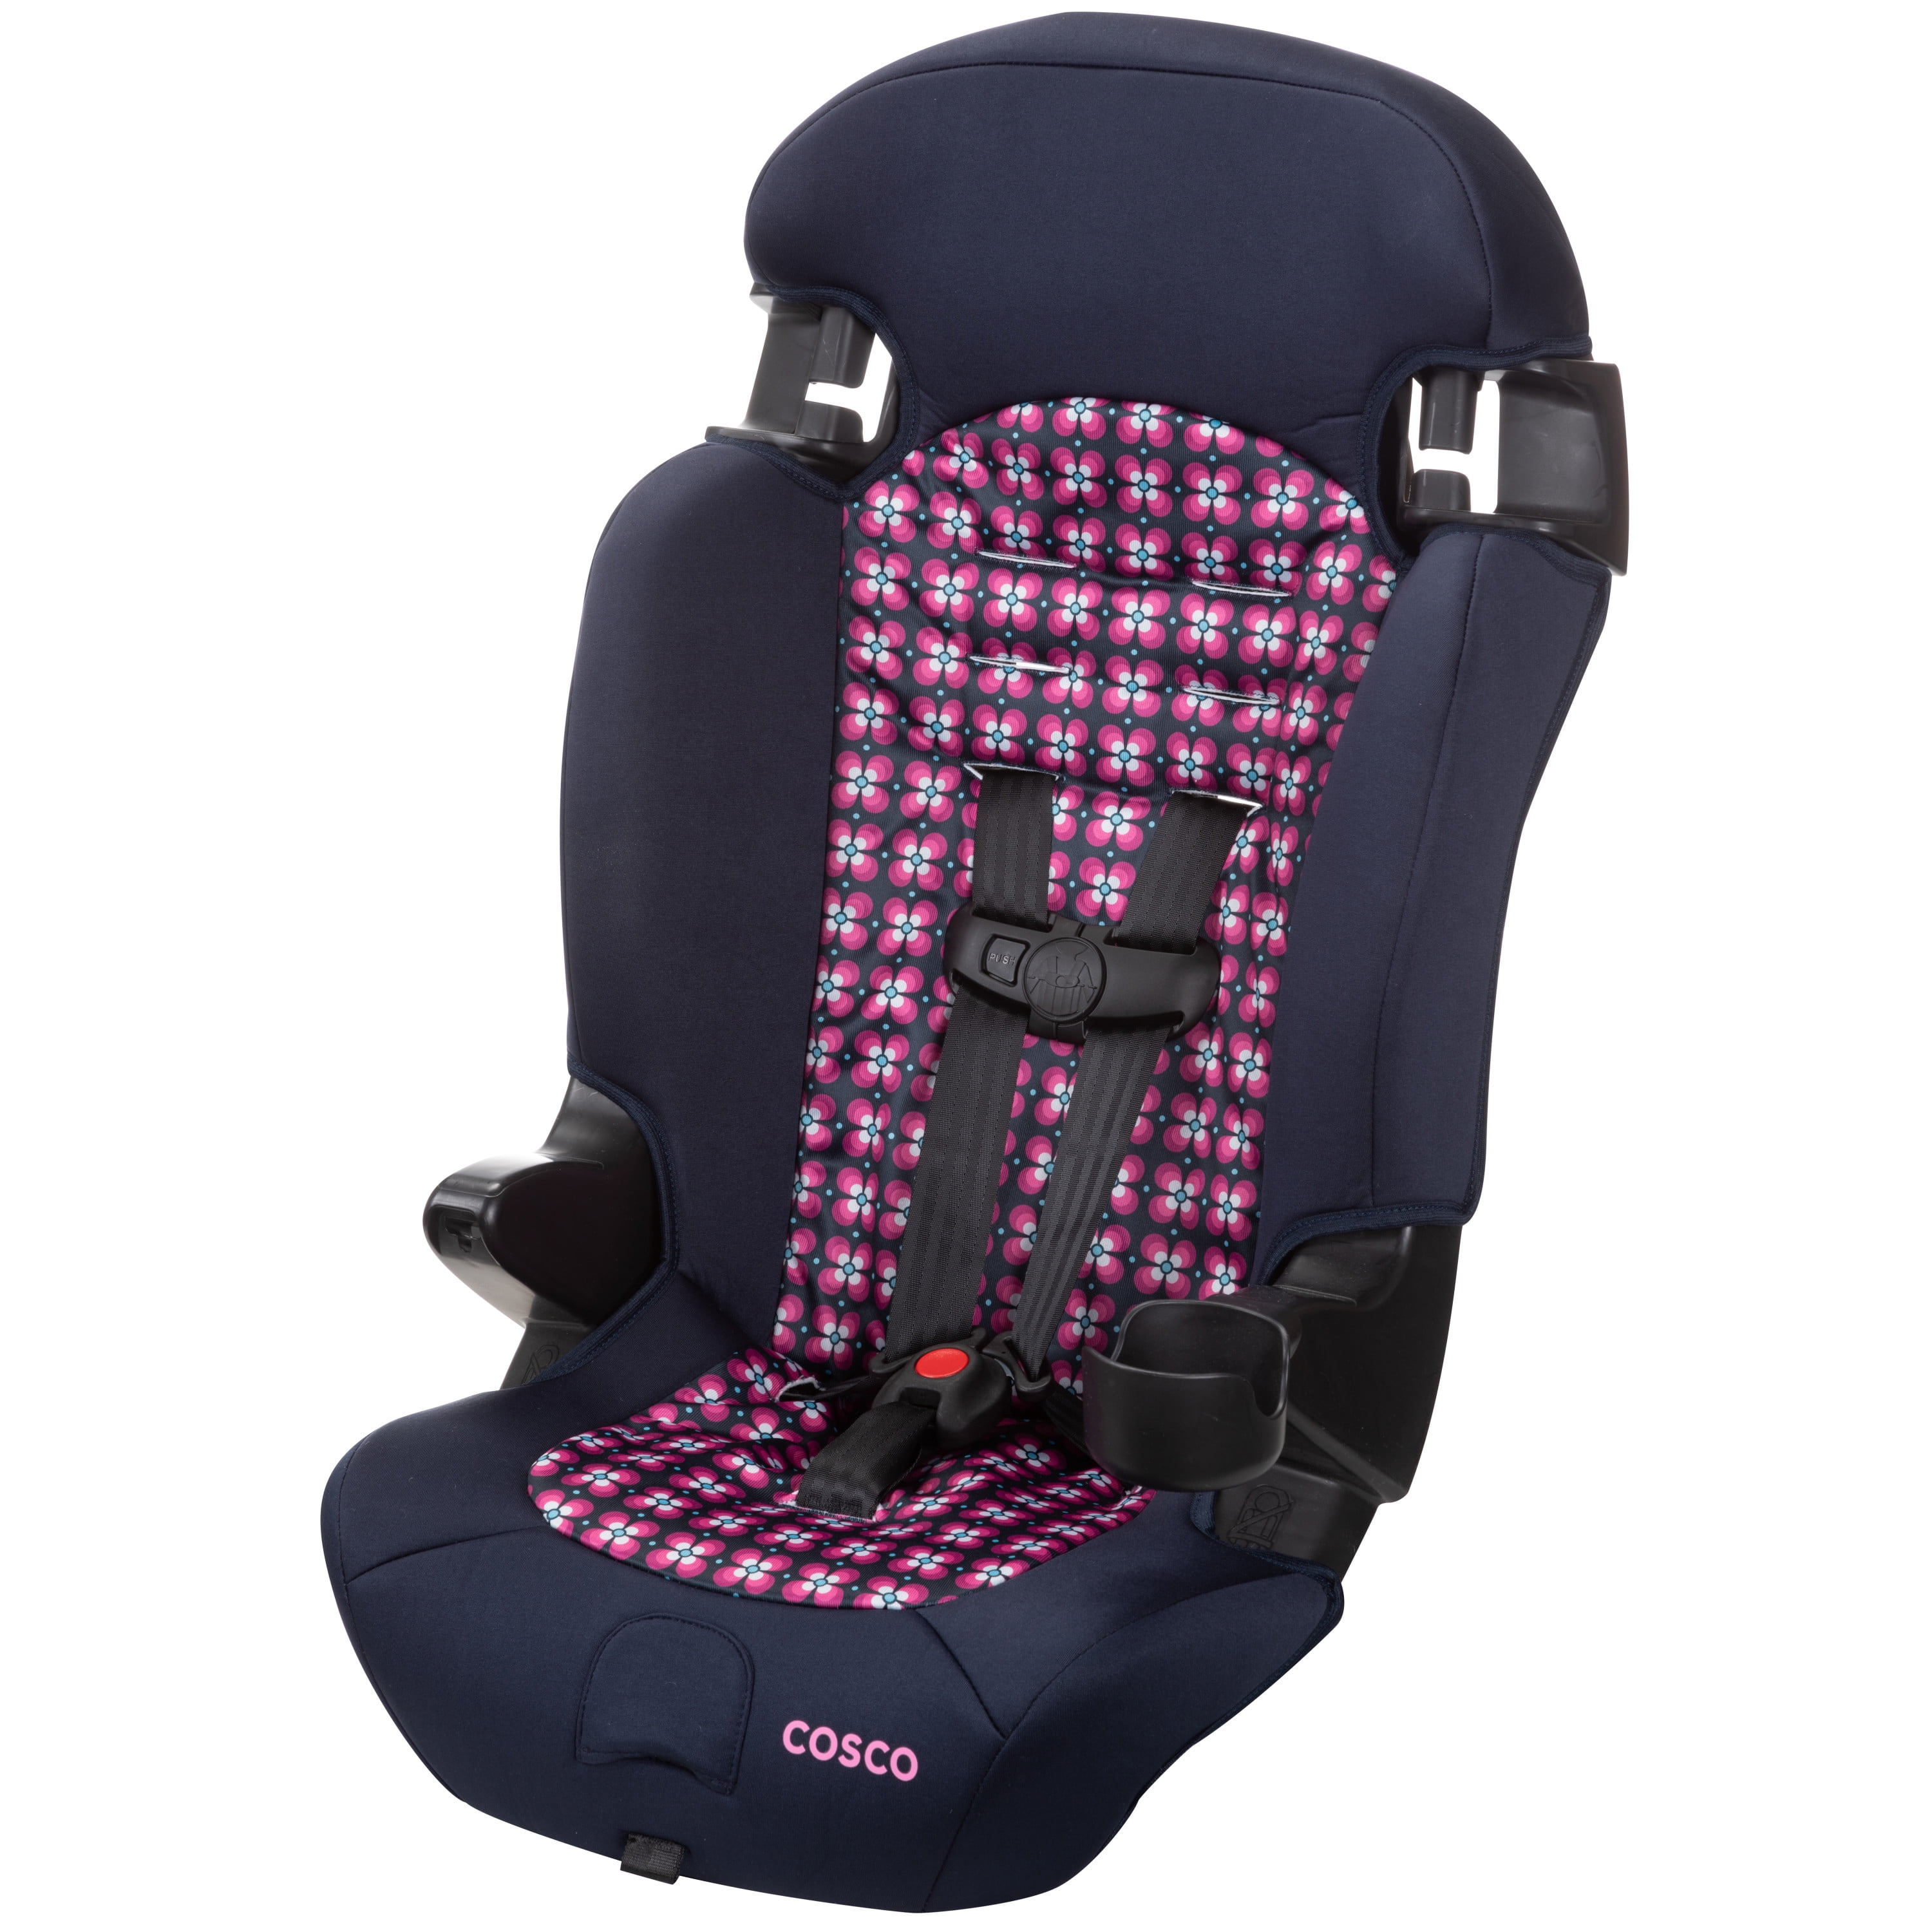 Cosco Finale 2-in-1 Booster Car Seat - Peony Tiles